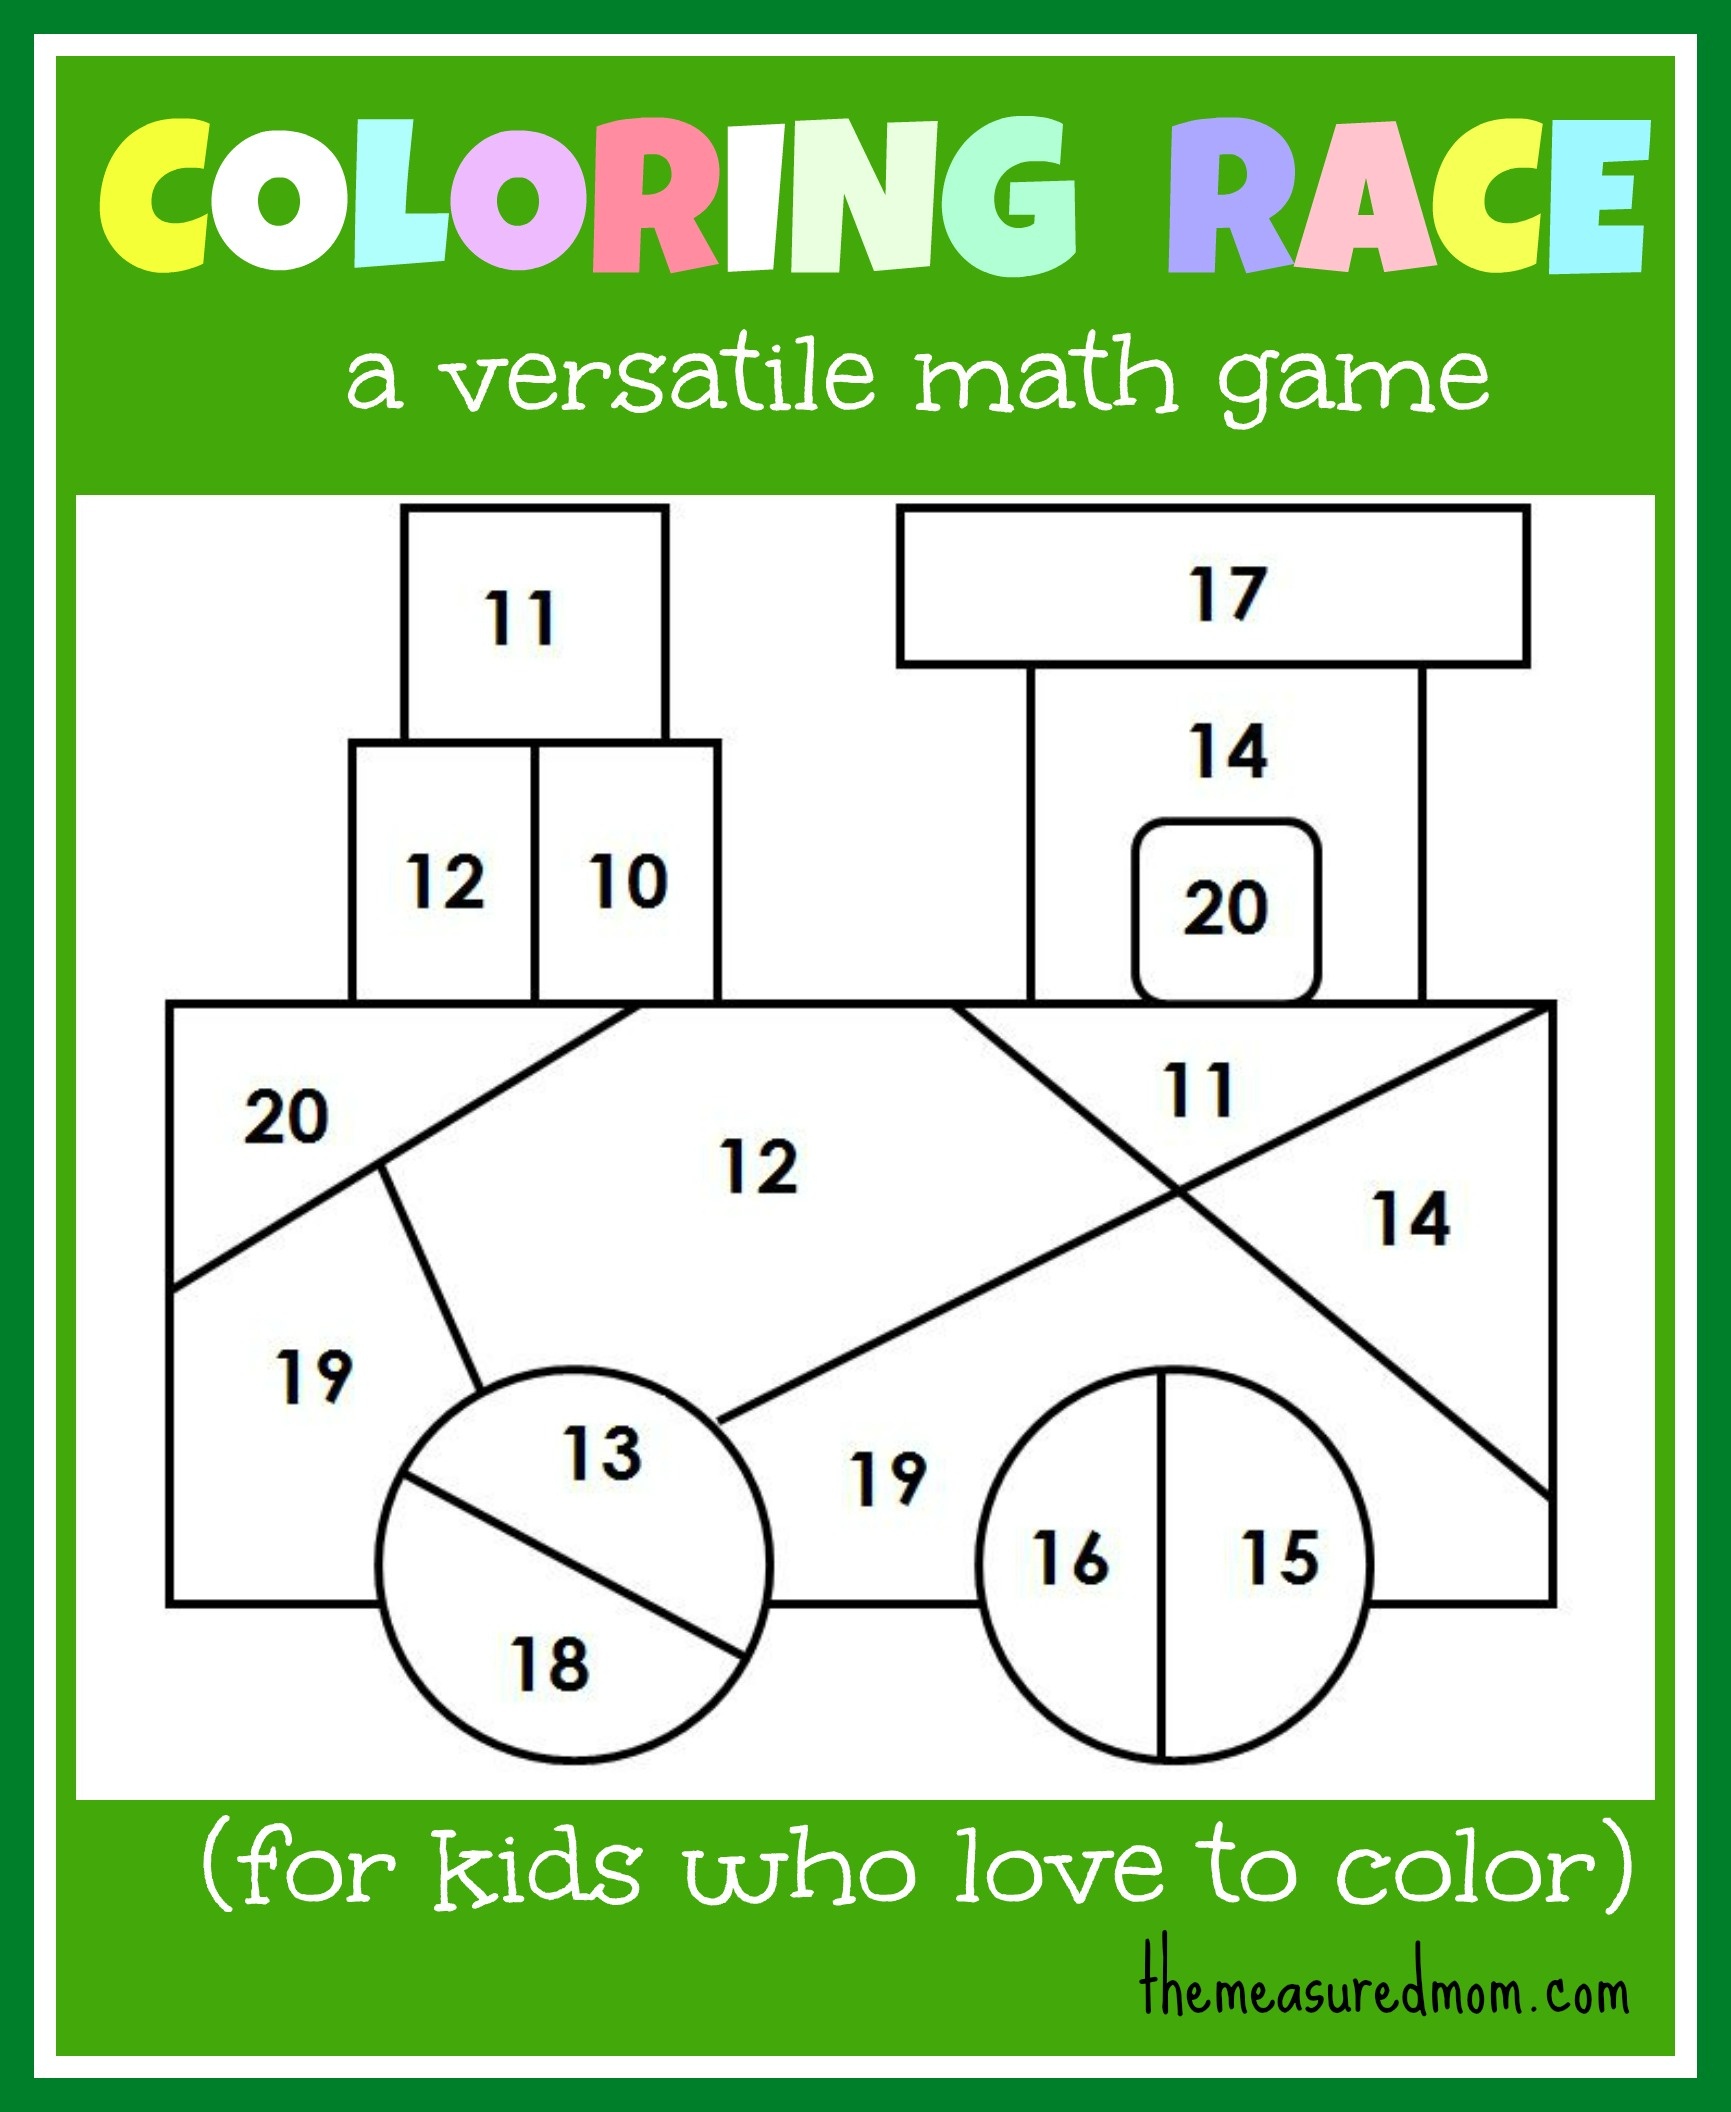 Math Game For Kids: Coloring Race Combines Math And Coloring - The - Free Printable Maths Games